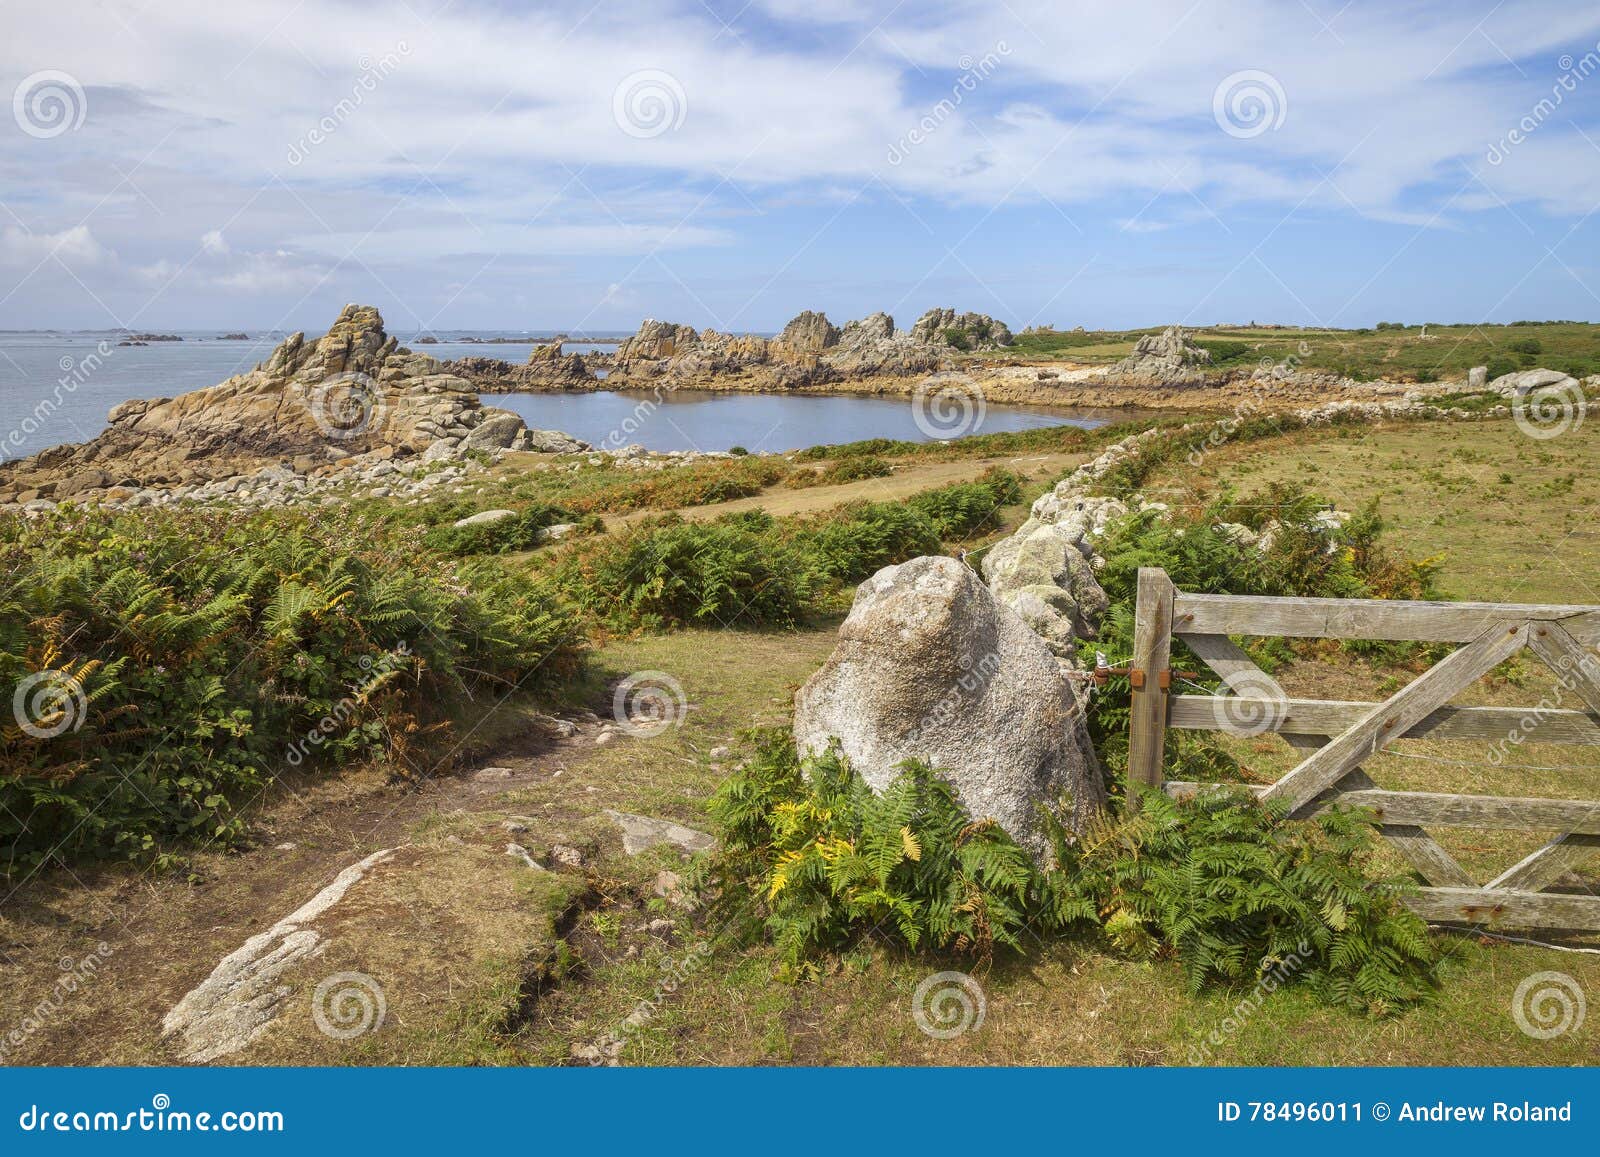 periglis, st agnes, isles of scilly, england